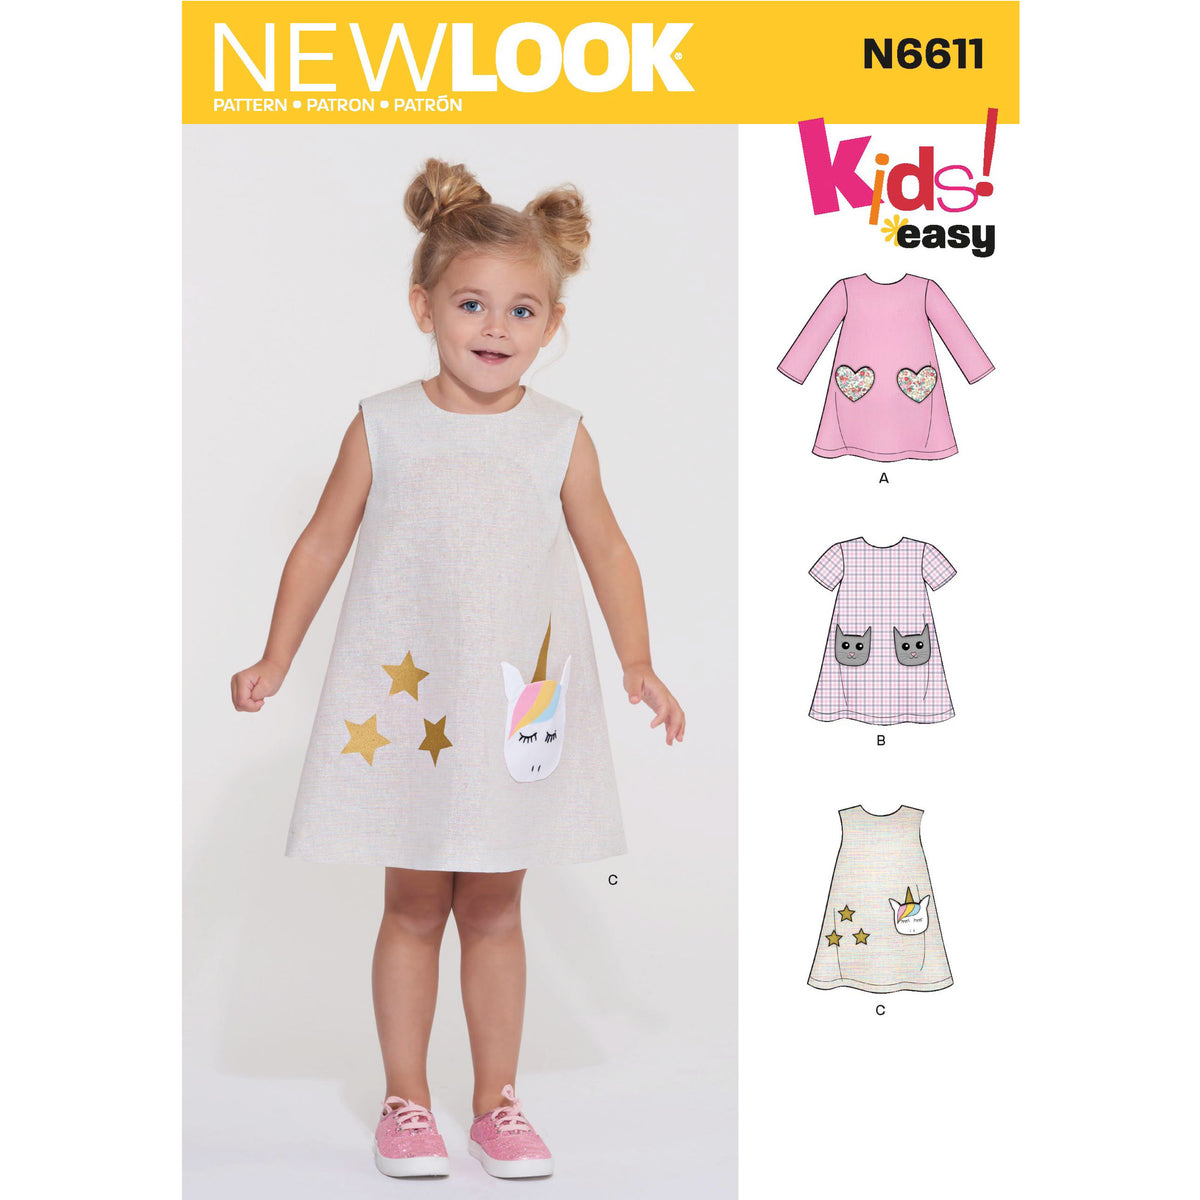 6611 New Look Sewing Pattern N6611 Children's Novelty Dress